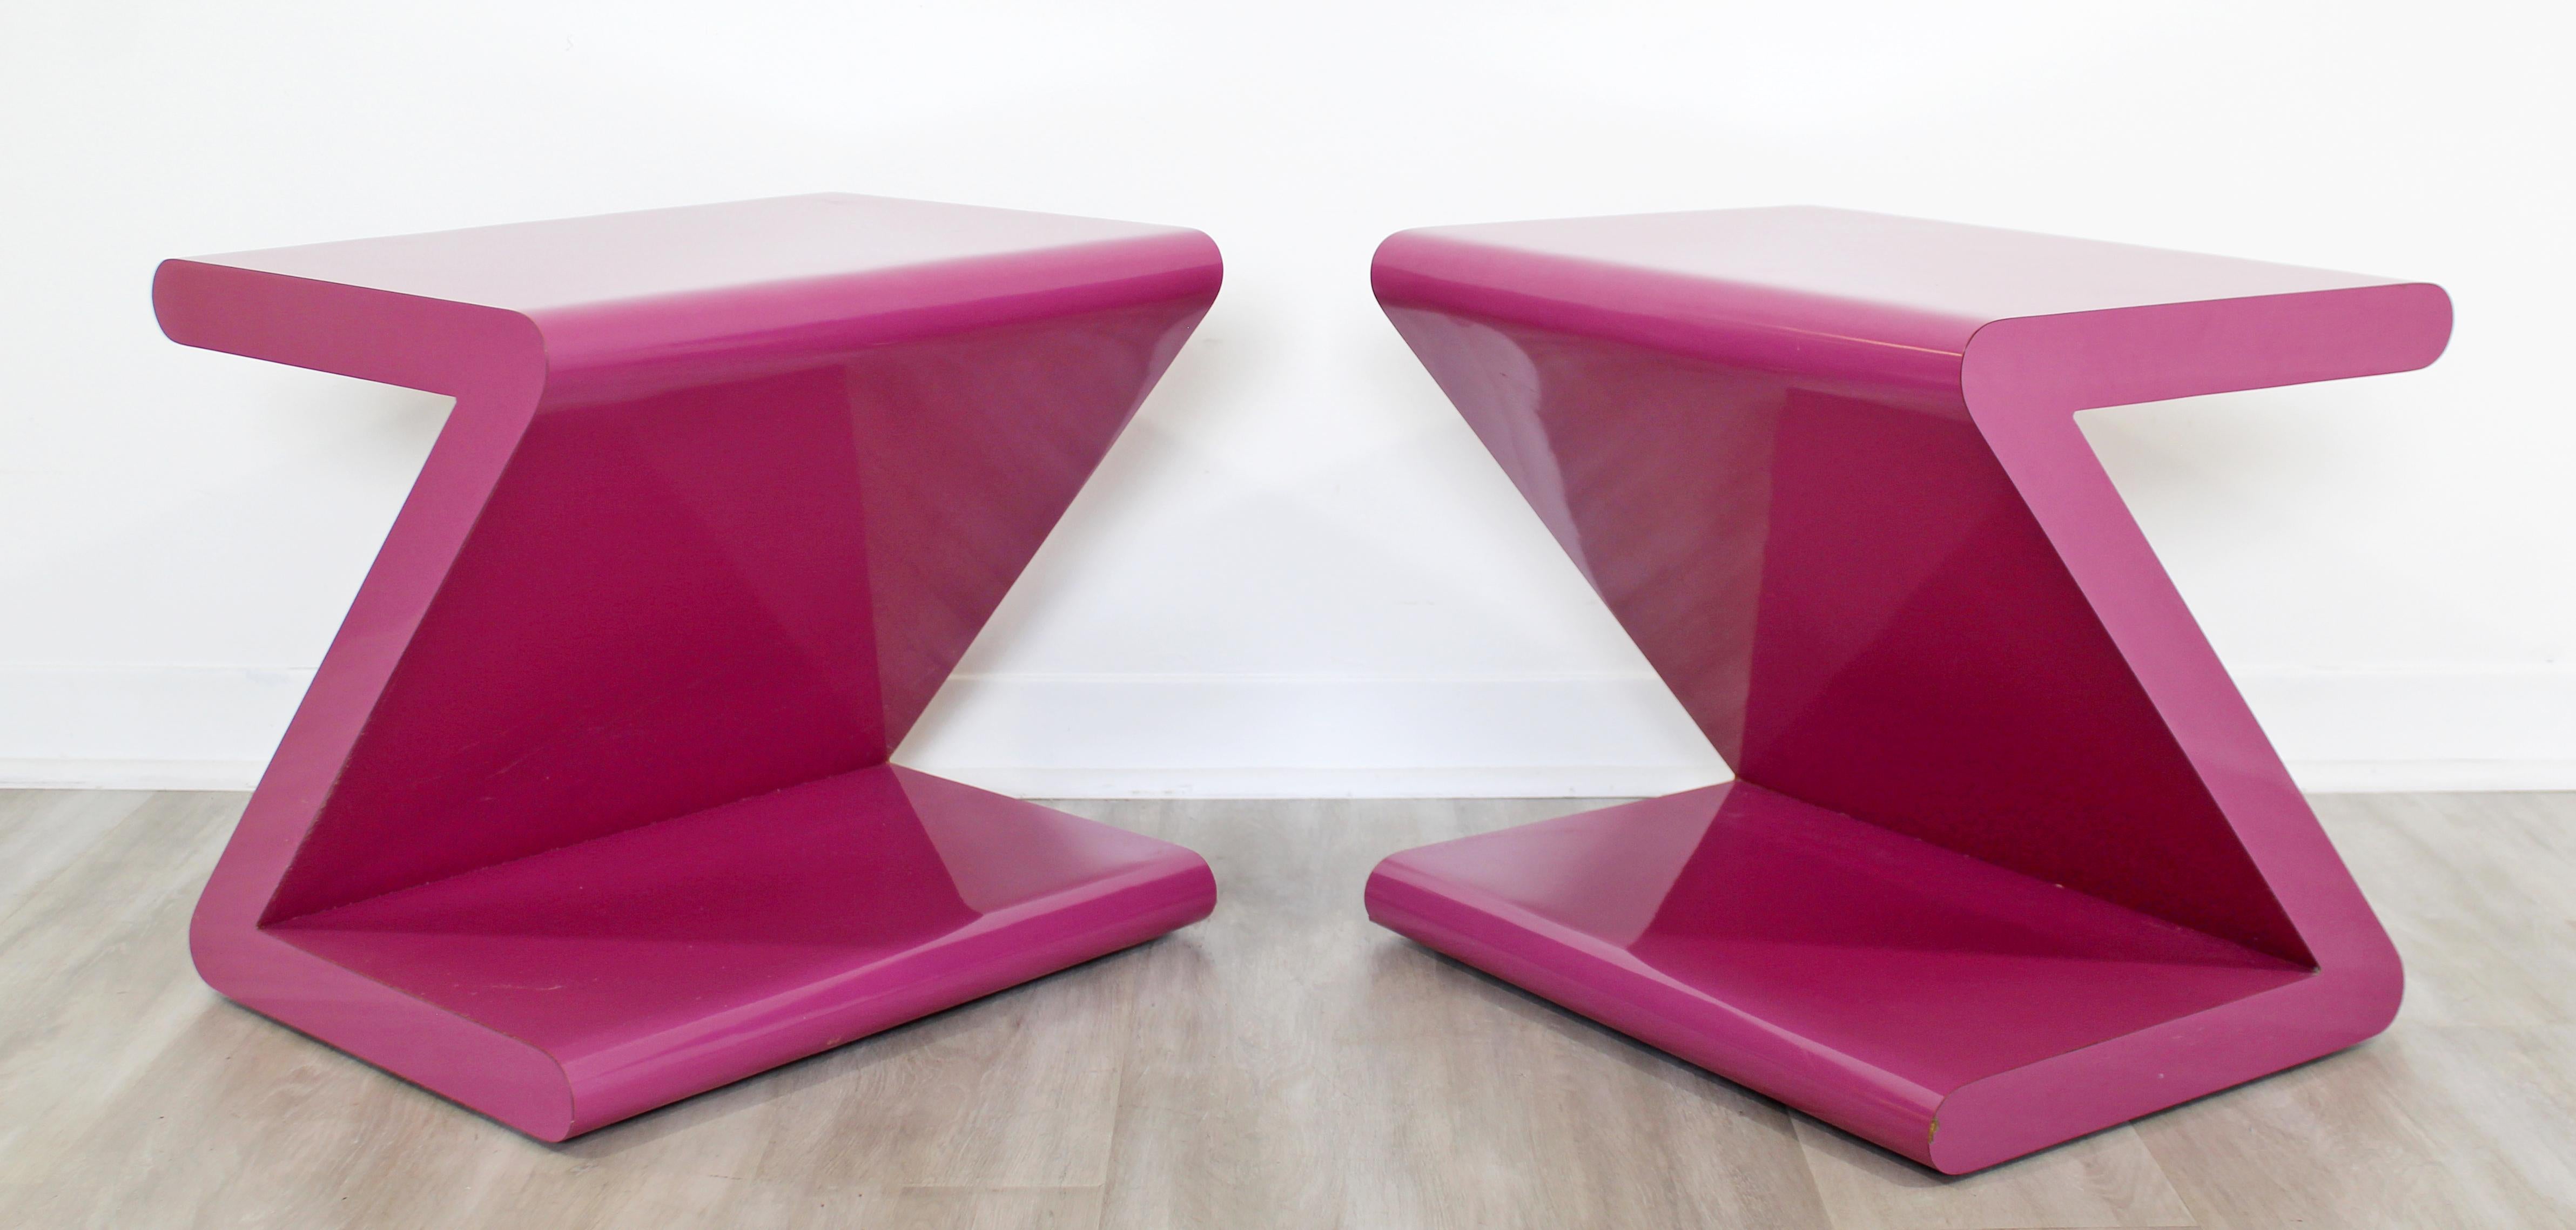 Contemporary Modern Pair of Acrylic Z-Shaped Side End Tables 1980s Pink 3